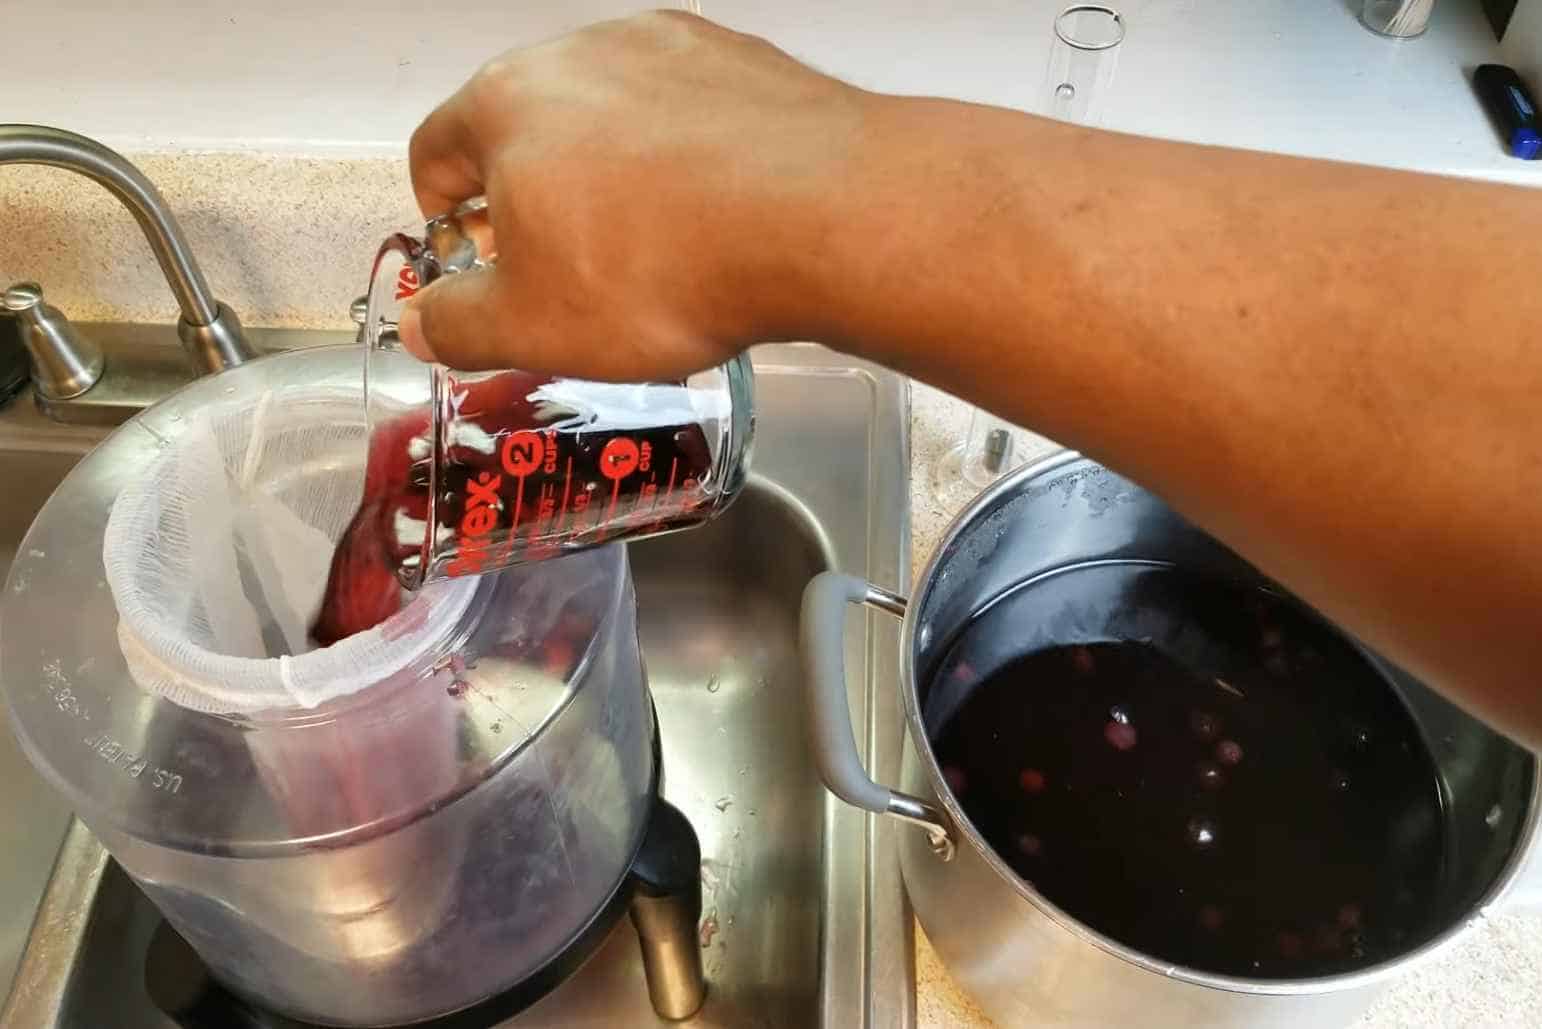 Once the blueberry juice has cooled down, you can transfer it to a fermenter jug using a strainer cloth so the berries will be blocked from it